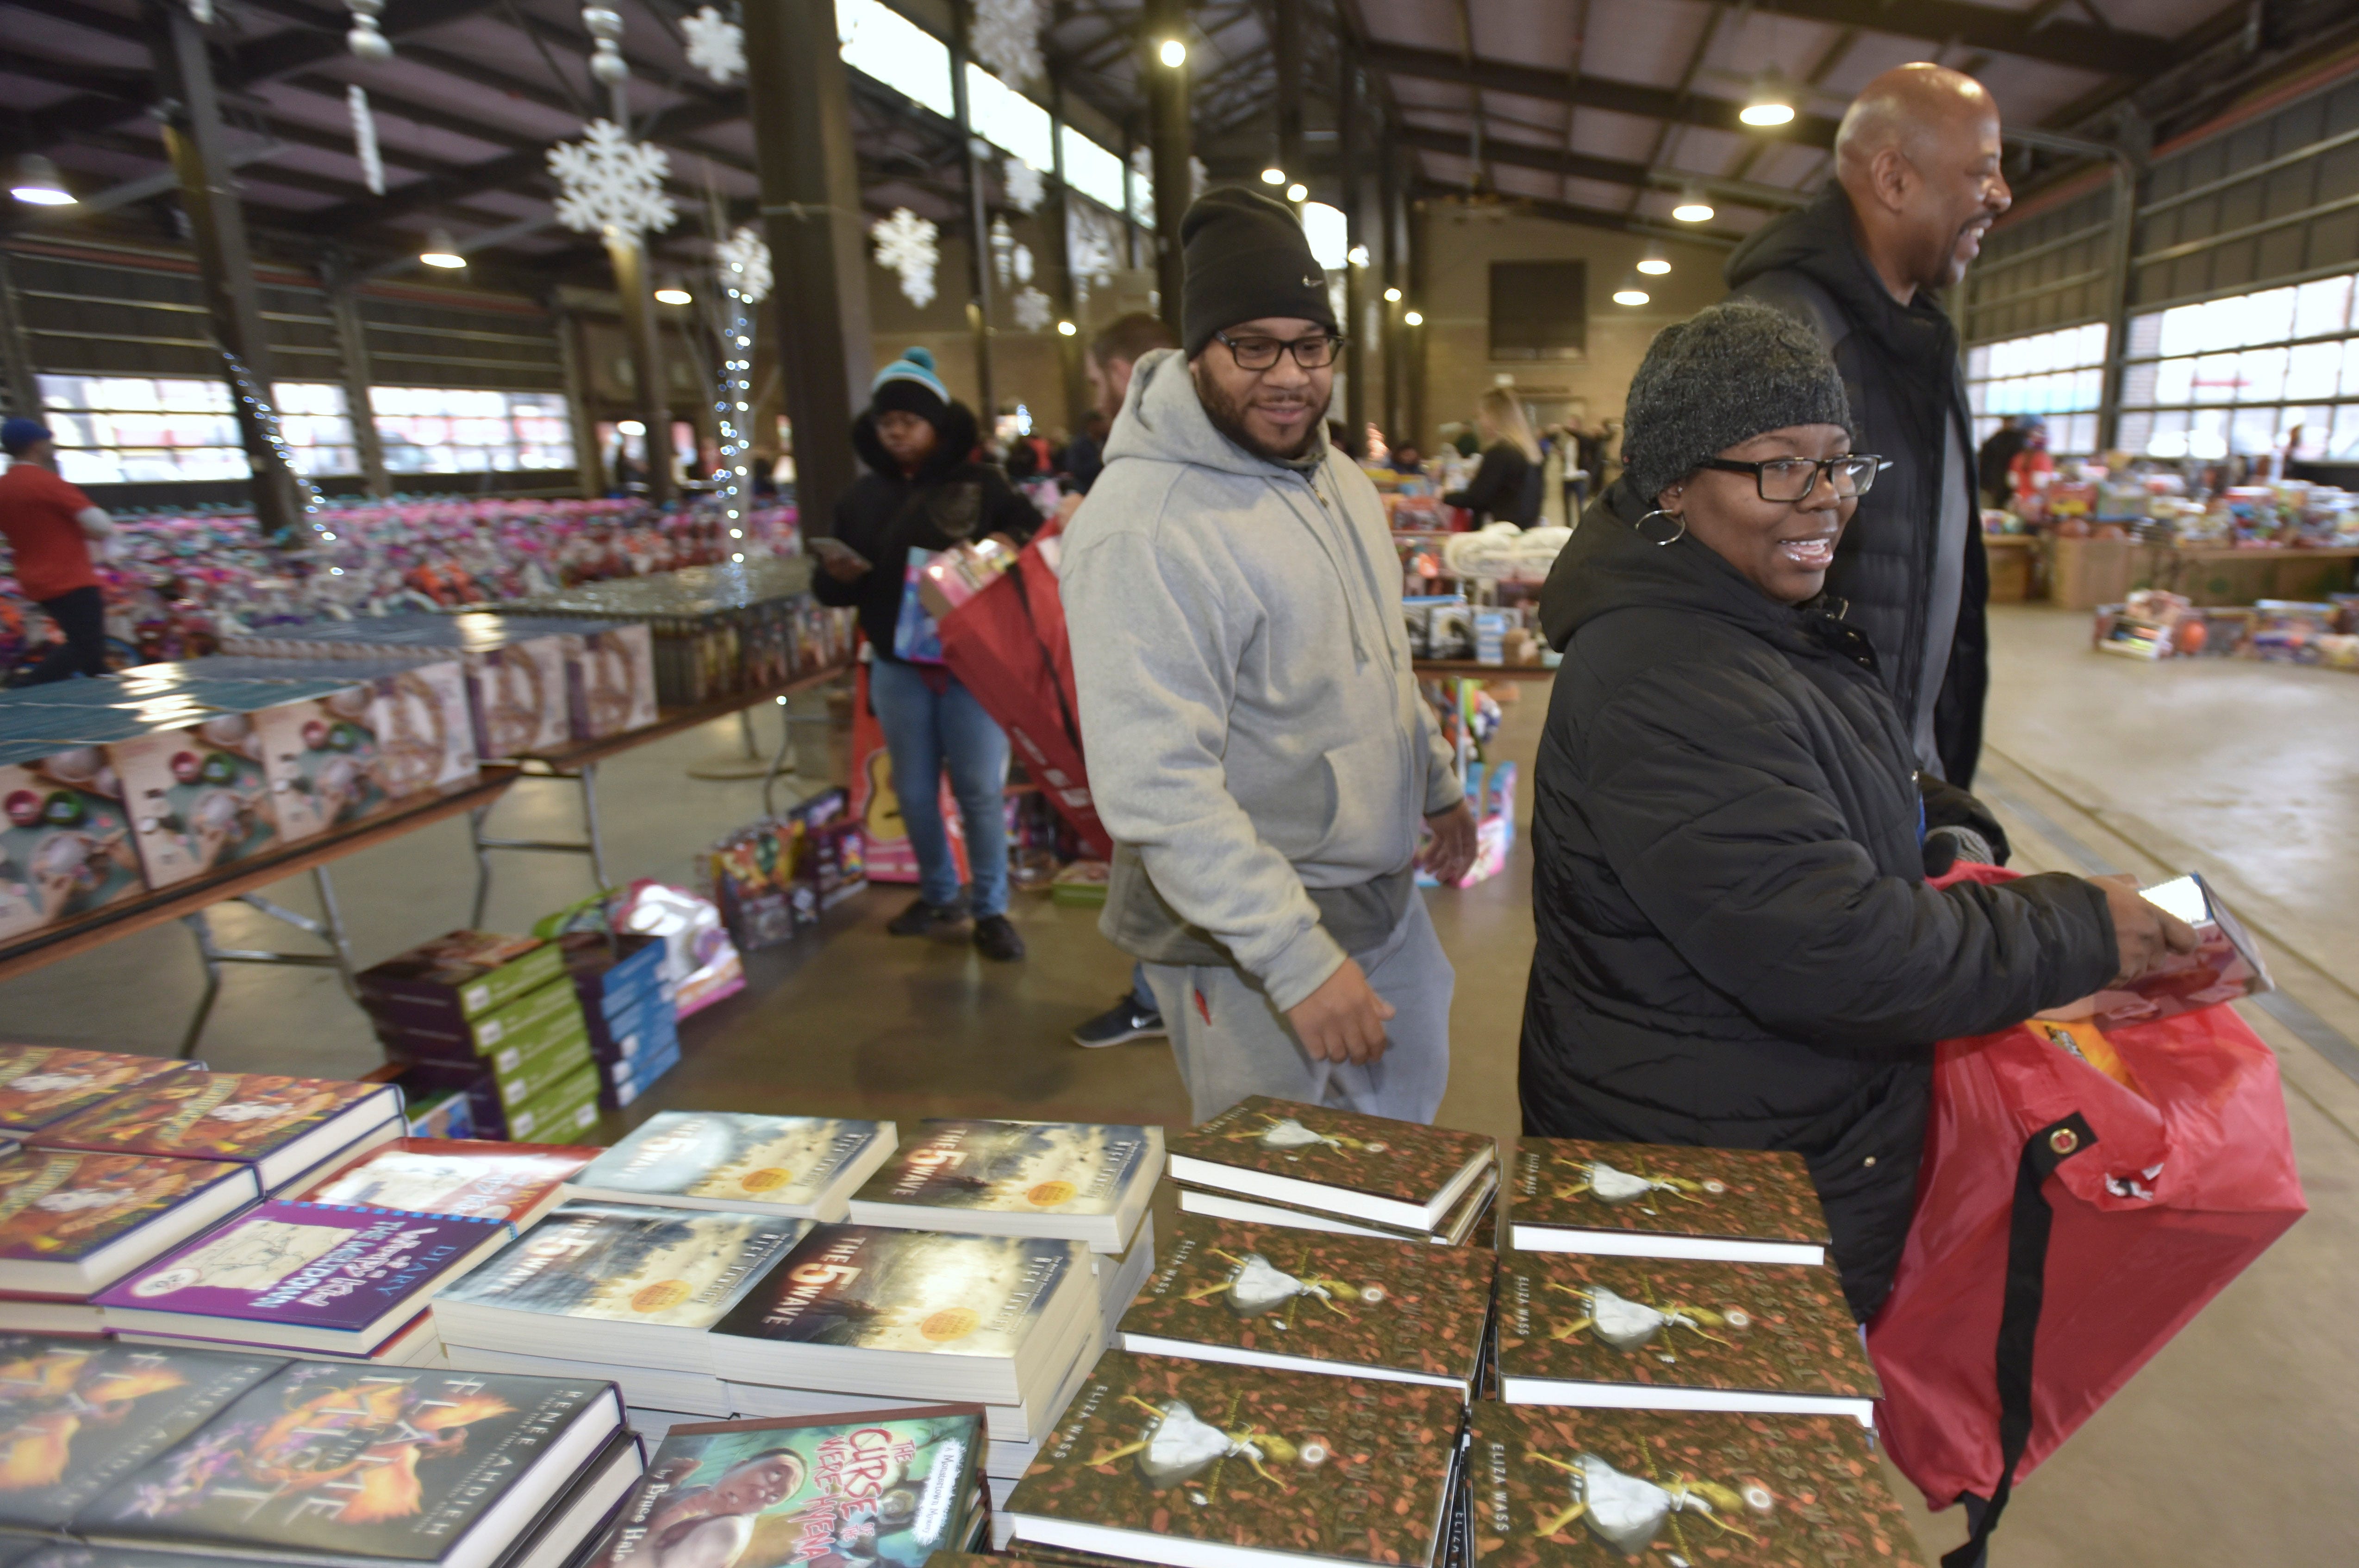 Pistons legend and community ambassador Earl Cureton, right, shares a laugh with Cheri Lynch, center, and her husband, Angelo Lynch, left, both of Detroit, as they shop for Christmas presents.